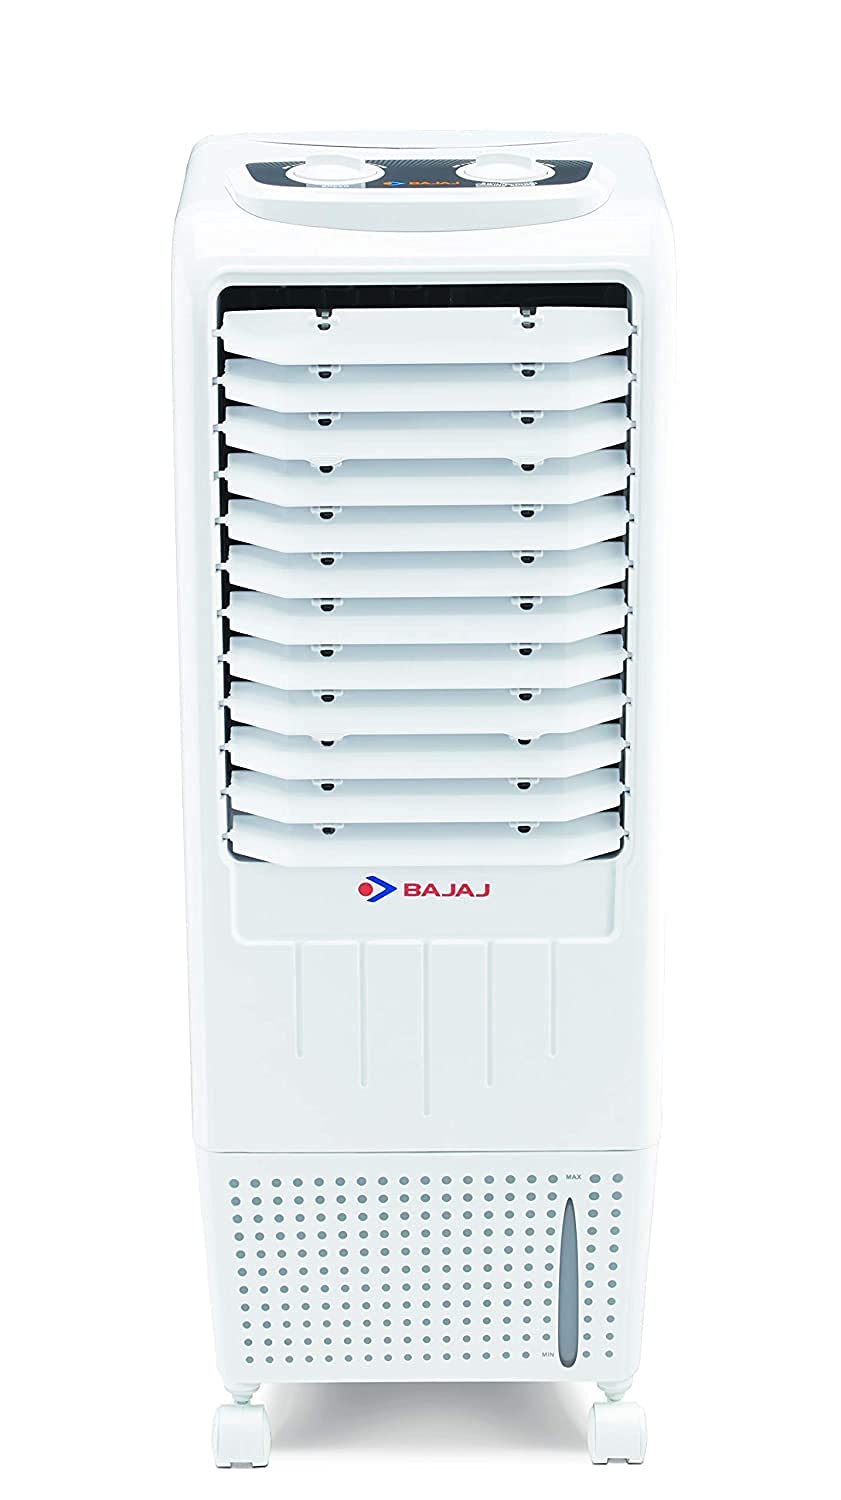 Bajaj TMH12 12-litres Tower Air Cooler (White) - for Small Room